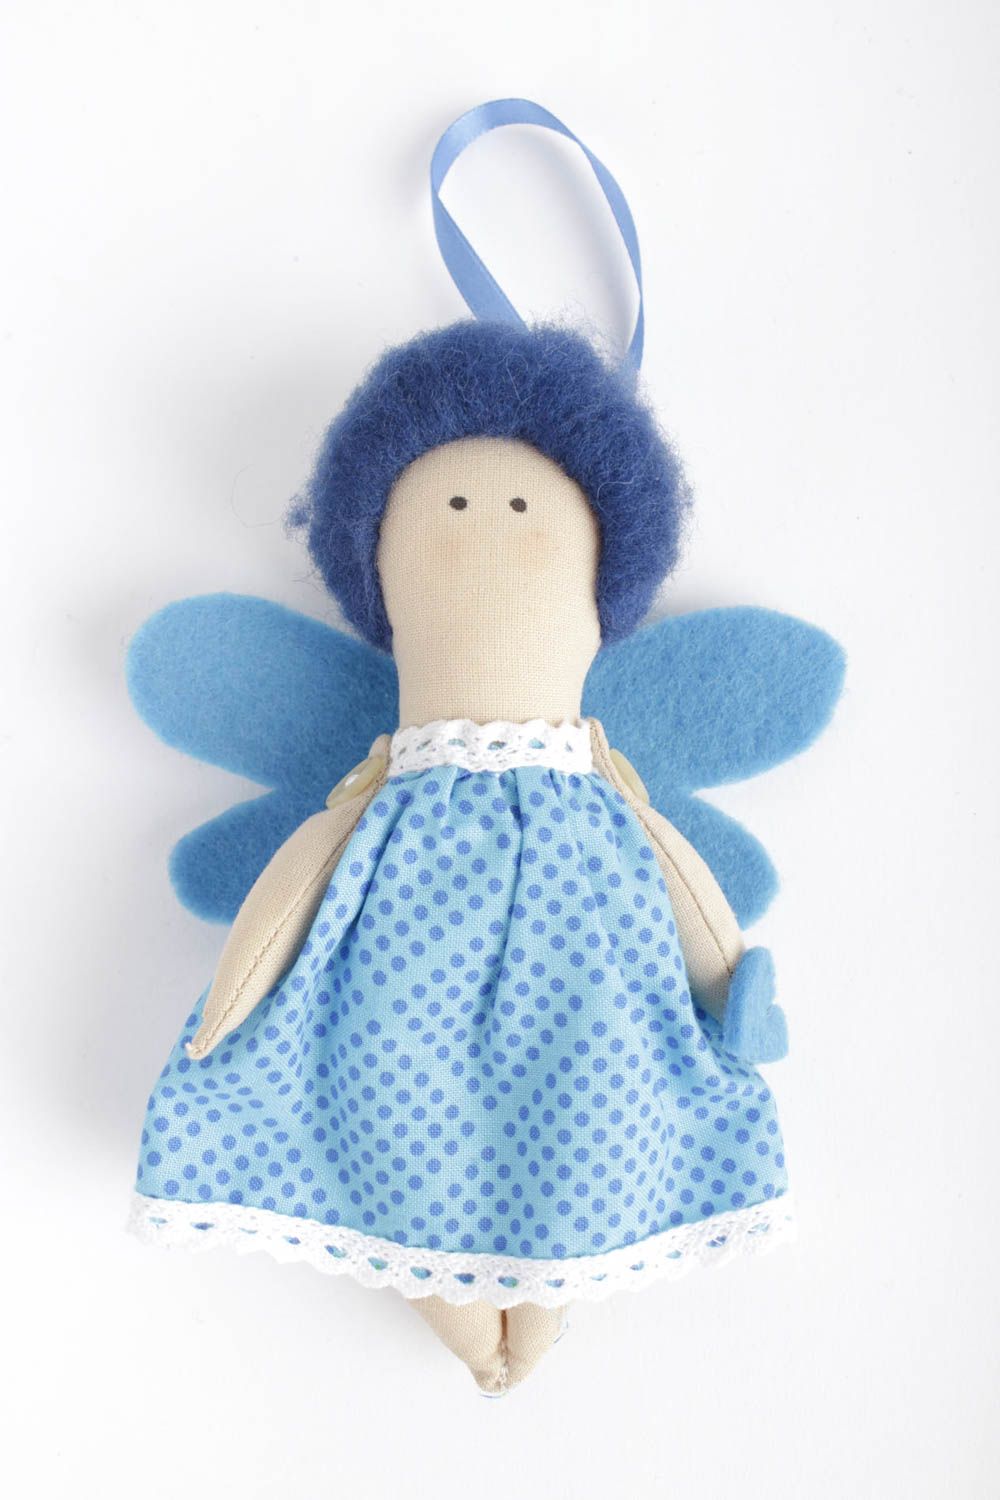 Homemade soft toy wall hanging plush doll home decor gifts for girls baby toys photo 4